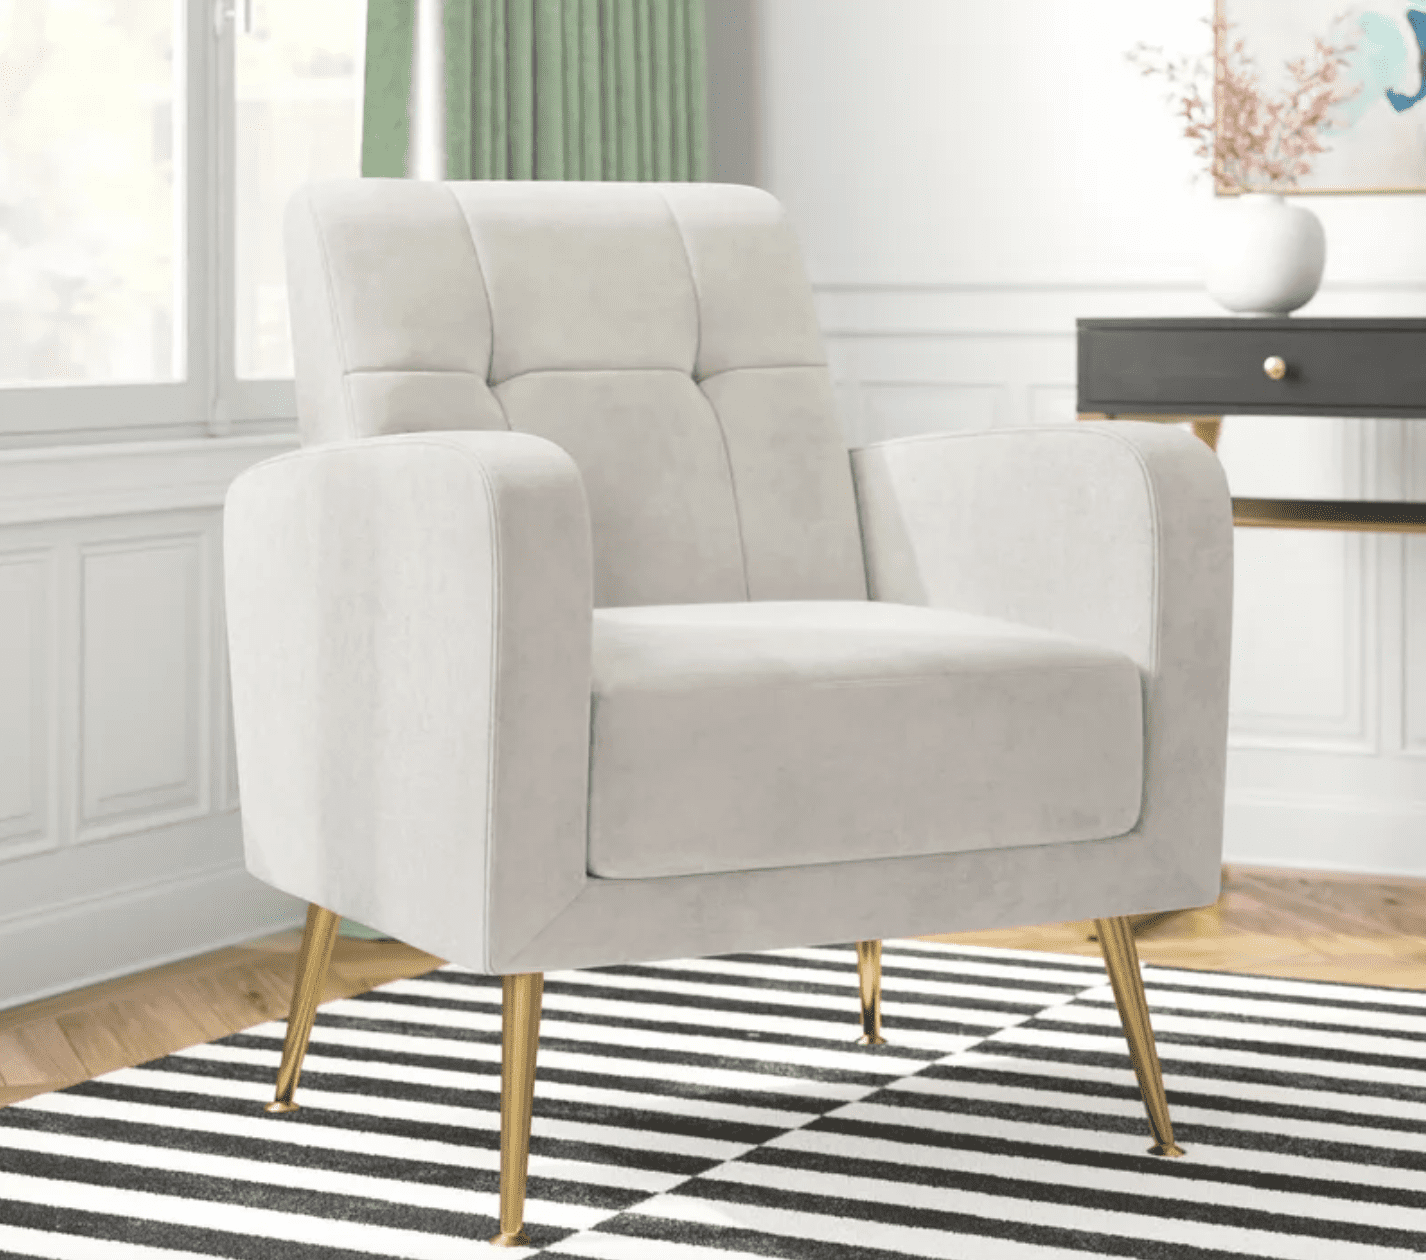 Prime Day 2020: Wayfair is hosting a huge clearance sale ahead of the sale